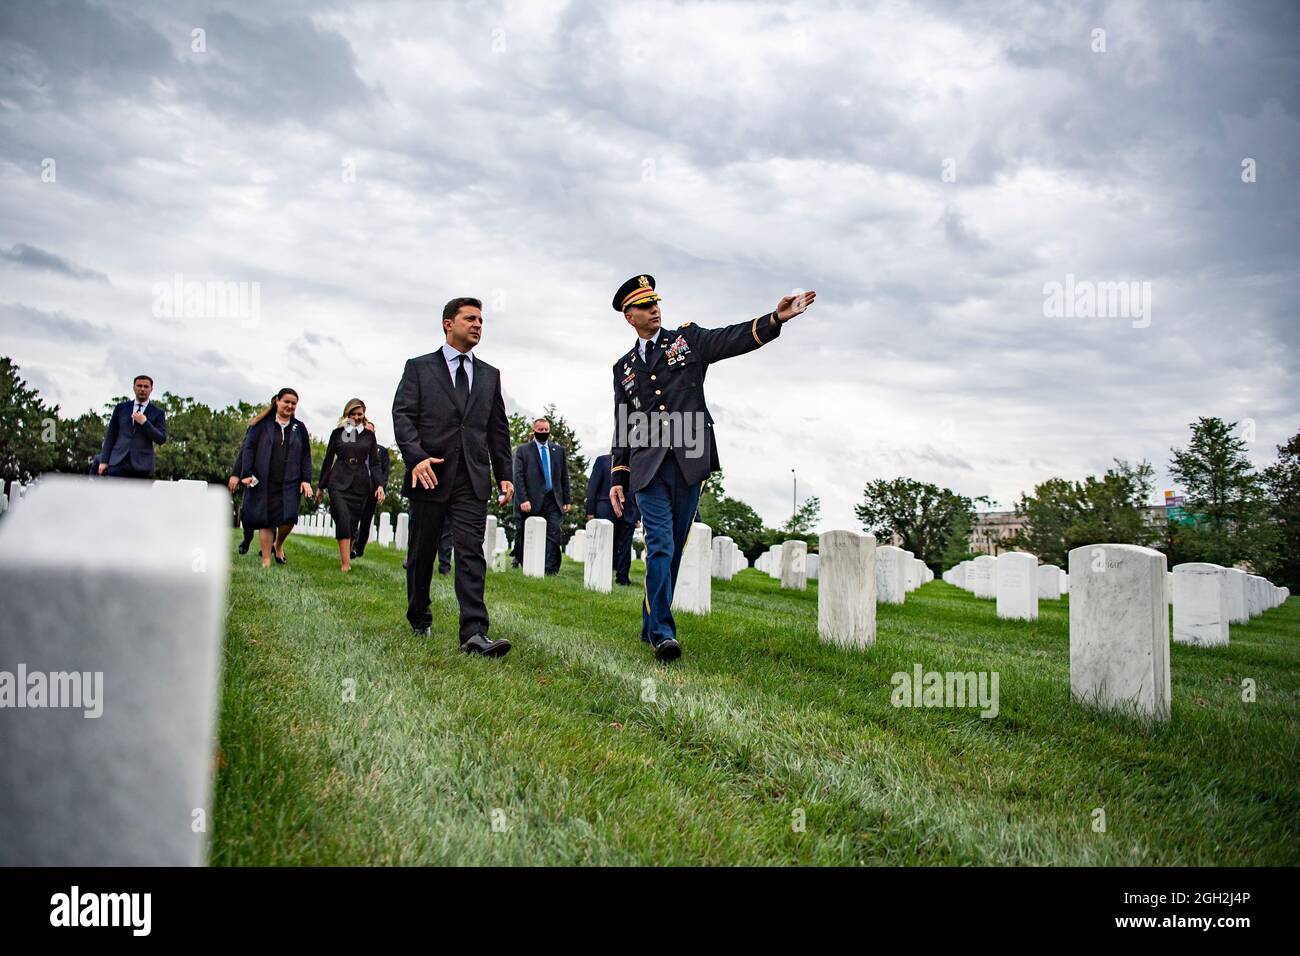 U.S. Army Col. Michael Binetti, right, escorts Ukraine First Ukrainian President Volodymyr Zelenskyy, during their visit to Arlington National Cemetery September 1, 2021 in Arlington, Virginia. Zelenskyy visited the tombs of several Polish American service members. Stock Photo